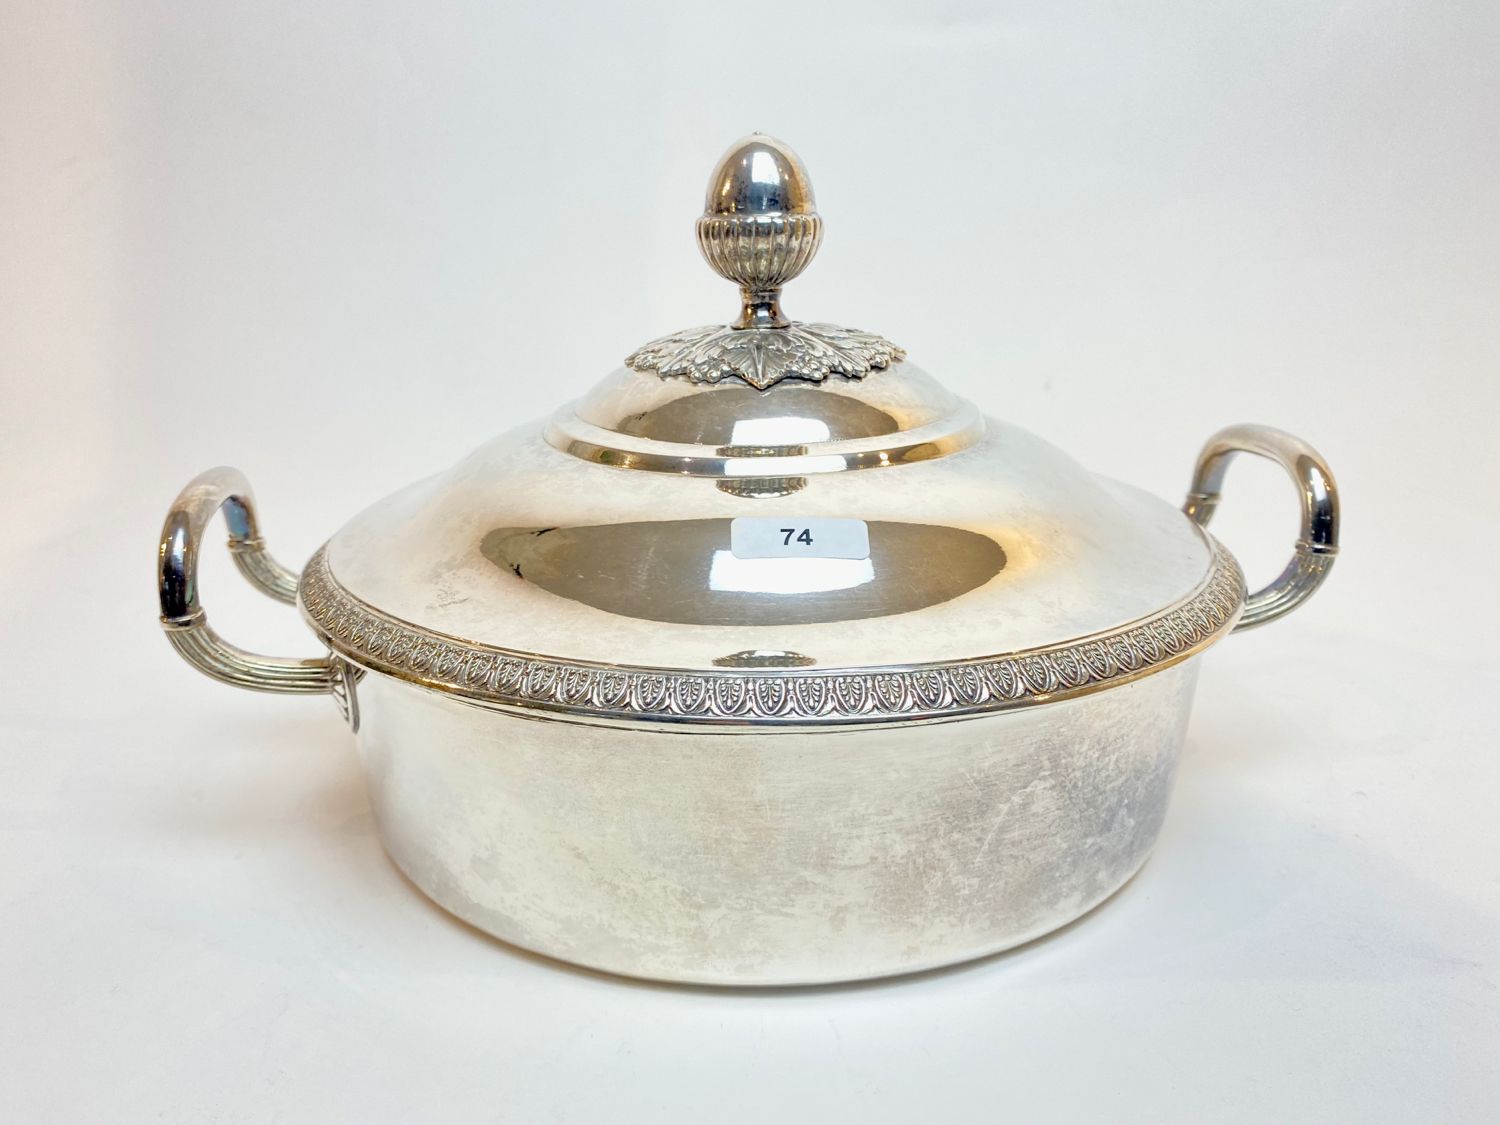 BELGIQUE Restoration period vegetable dish, 1814-1831, chased silver (833 thousa&hellip;